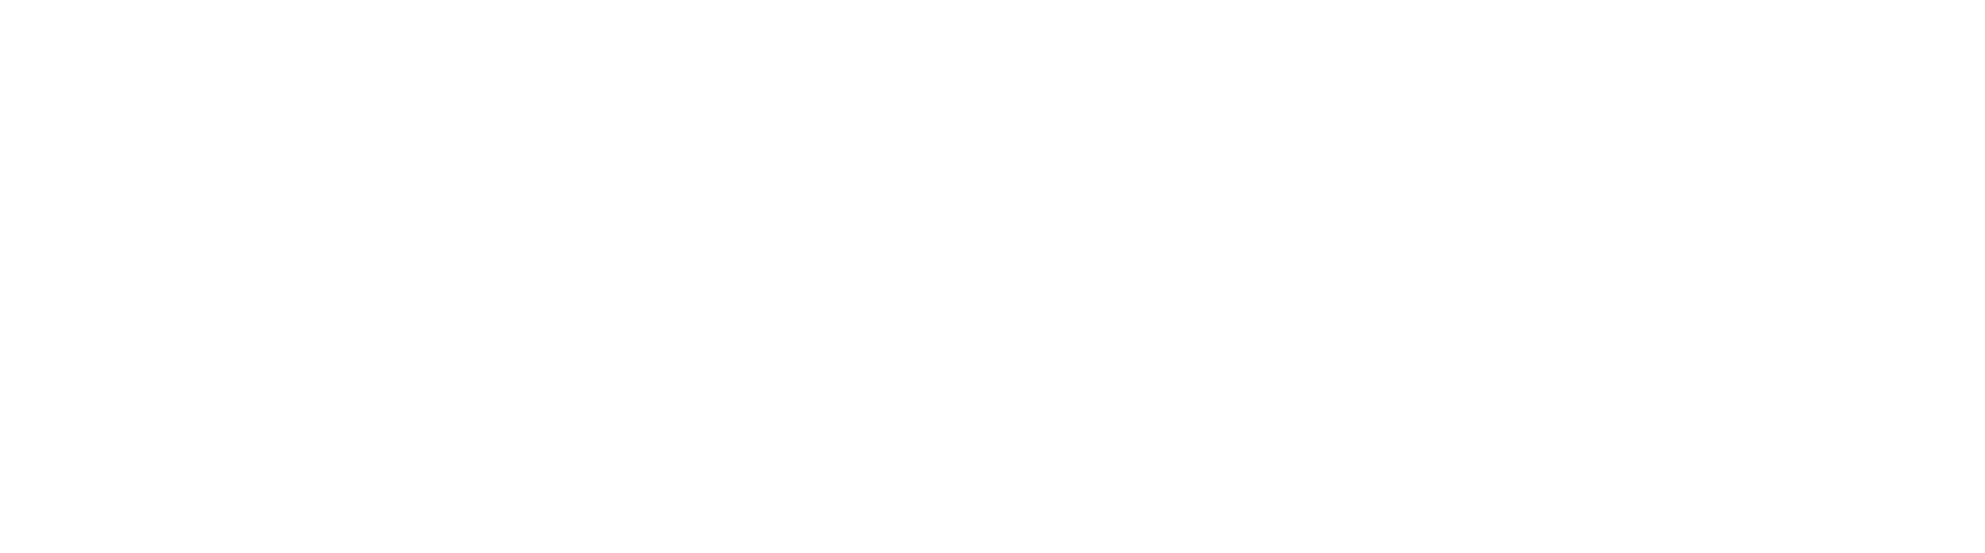 Wynne Sytems logo for Rental ERP and equipment management software